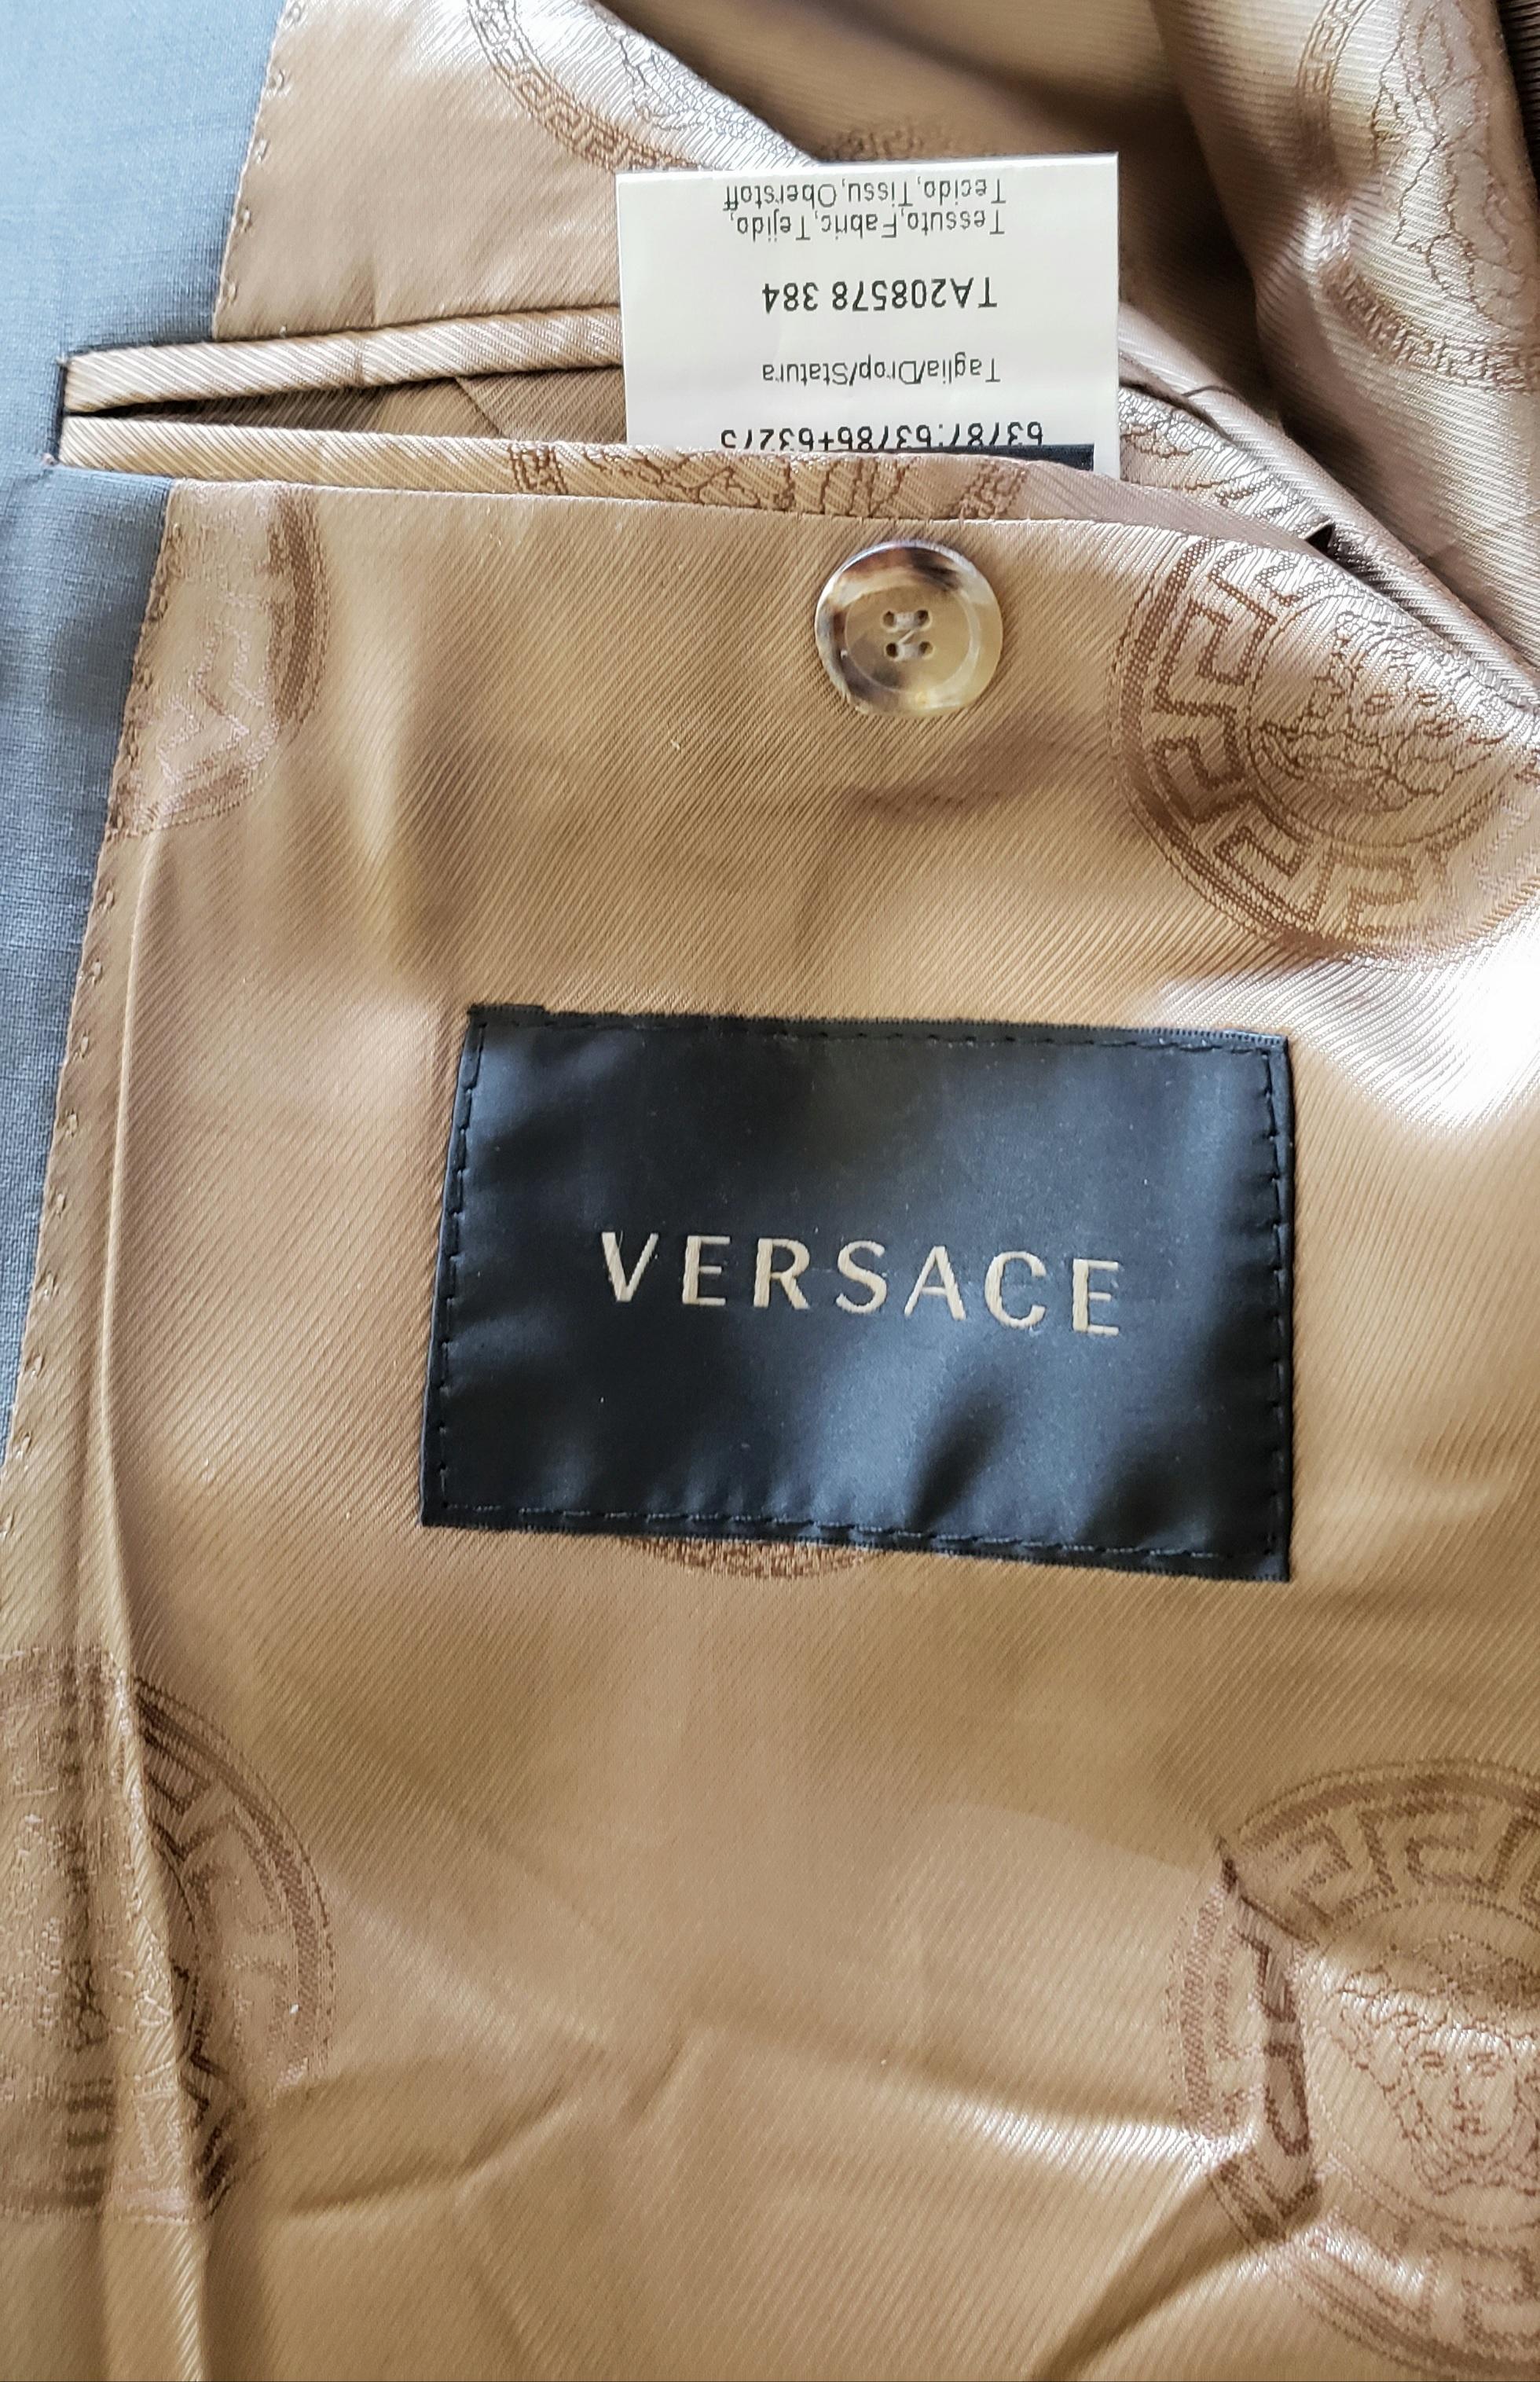 VERSACE S/S 2012 look # 30 BRAND NEW GRAY SUIT 48 - 38 (M) For Sale 5